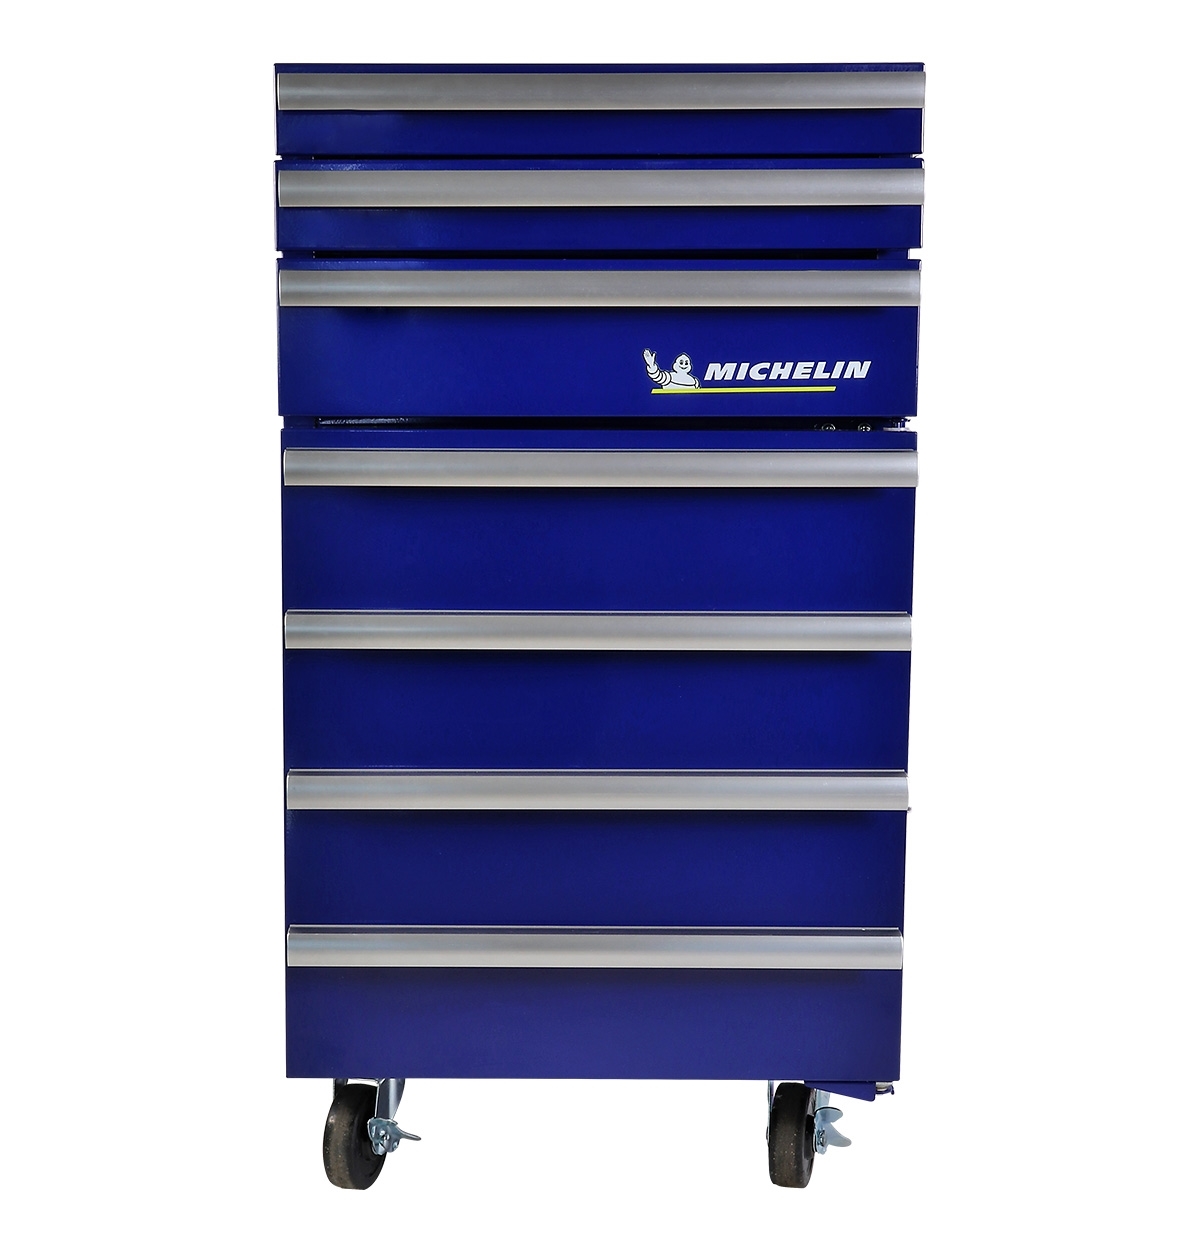 Michelin Tool Chest Compact Fridge, 1.8 Cu ft. (50L), Blue, with Wheels - image 1 of 13